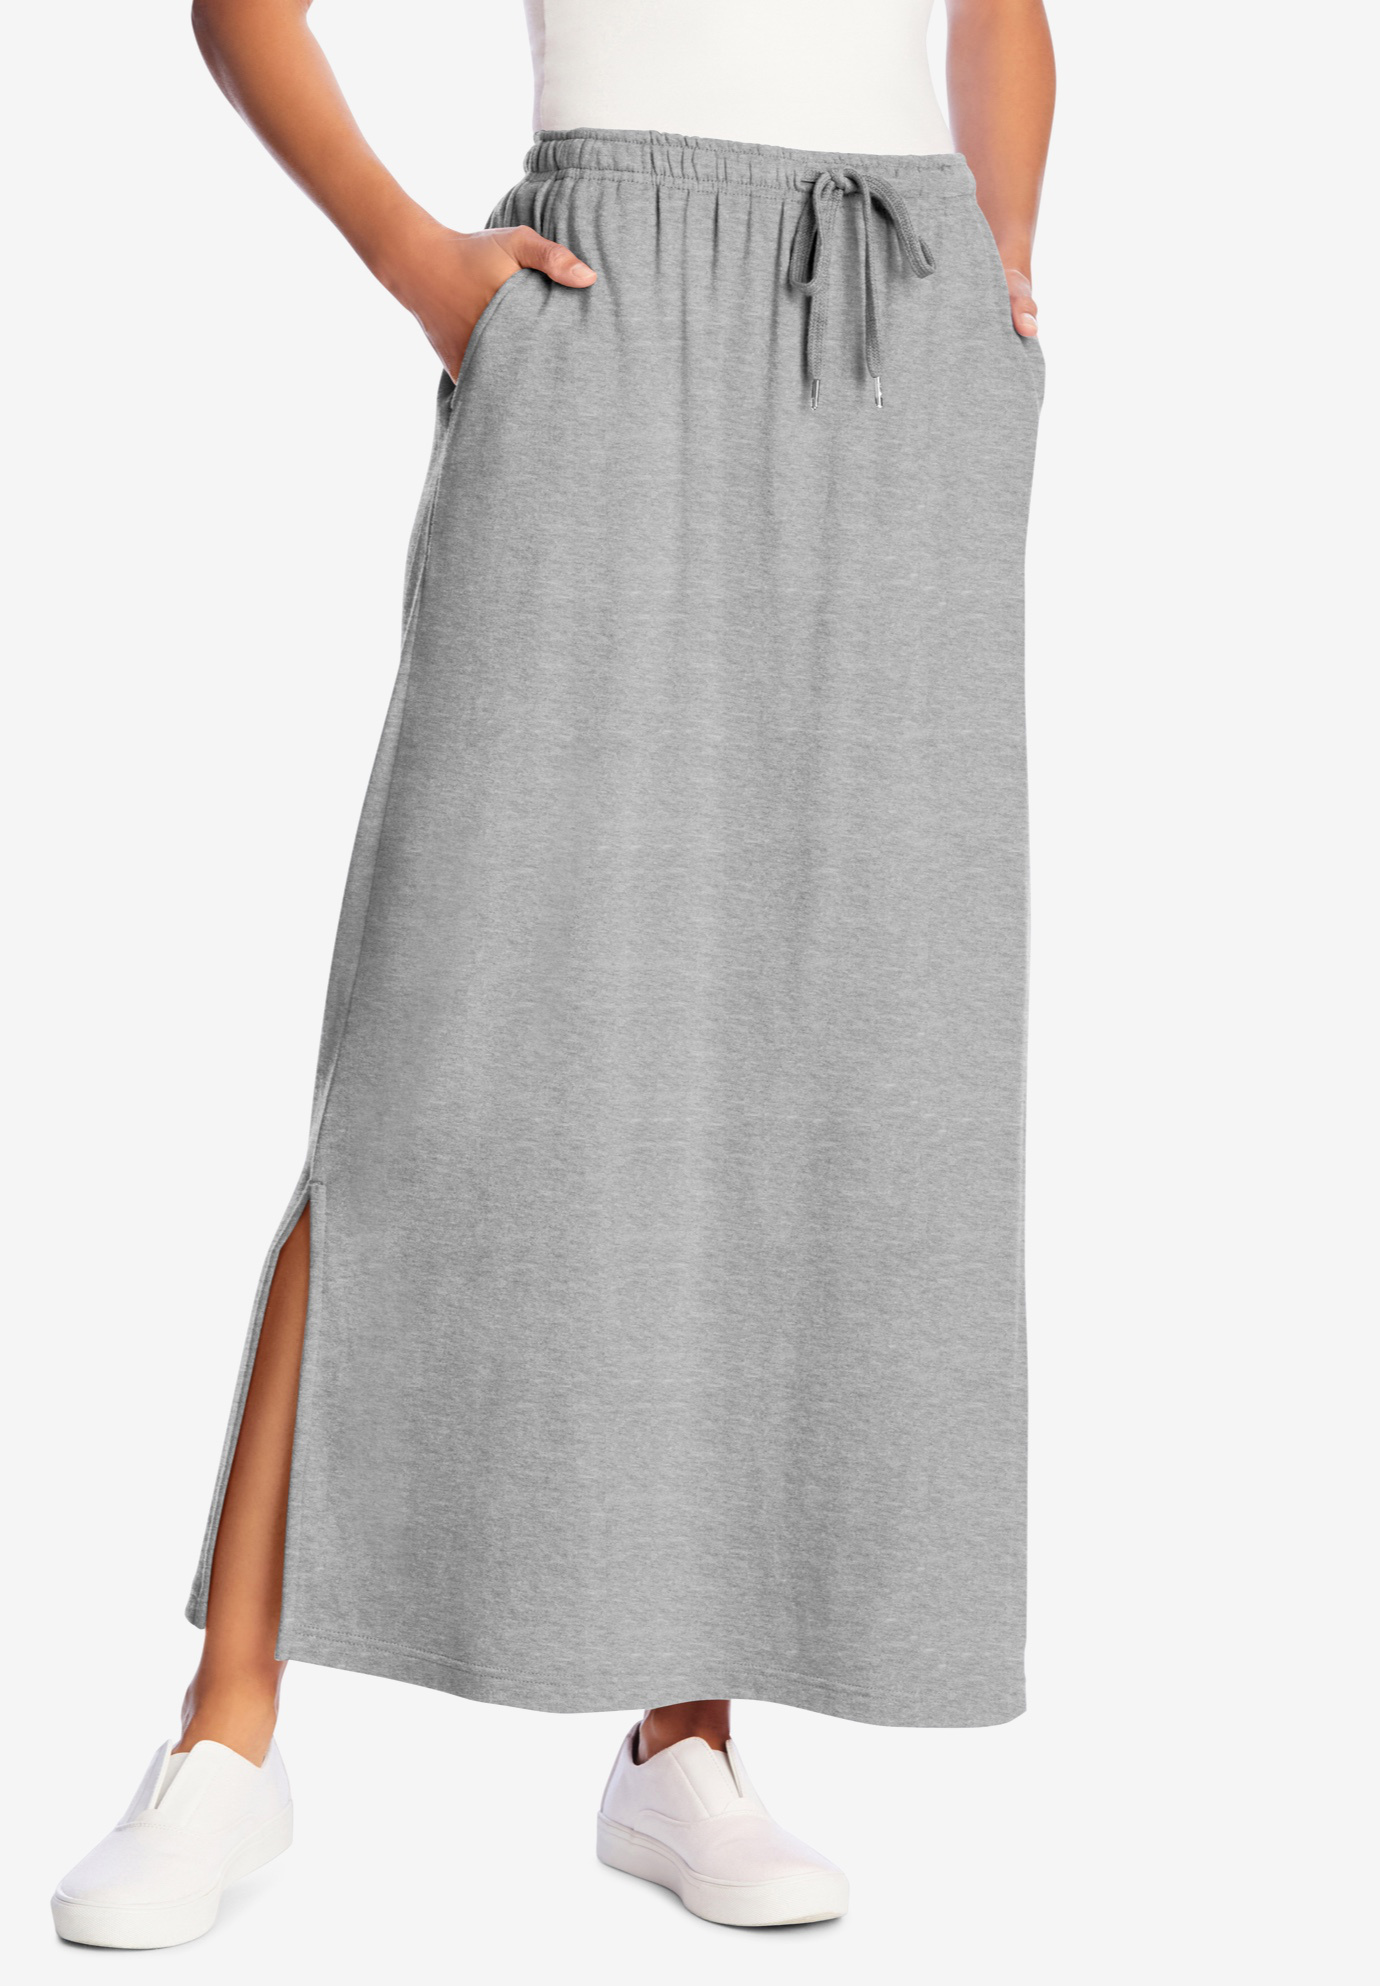 Sport Knit Side-Slit Skirt | Woman Within